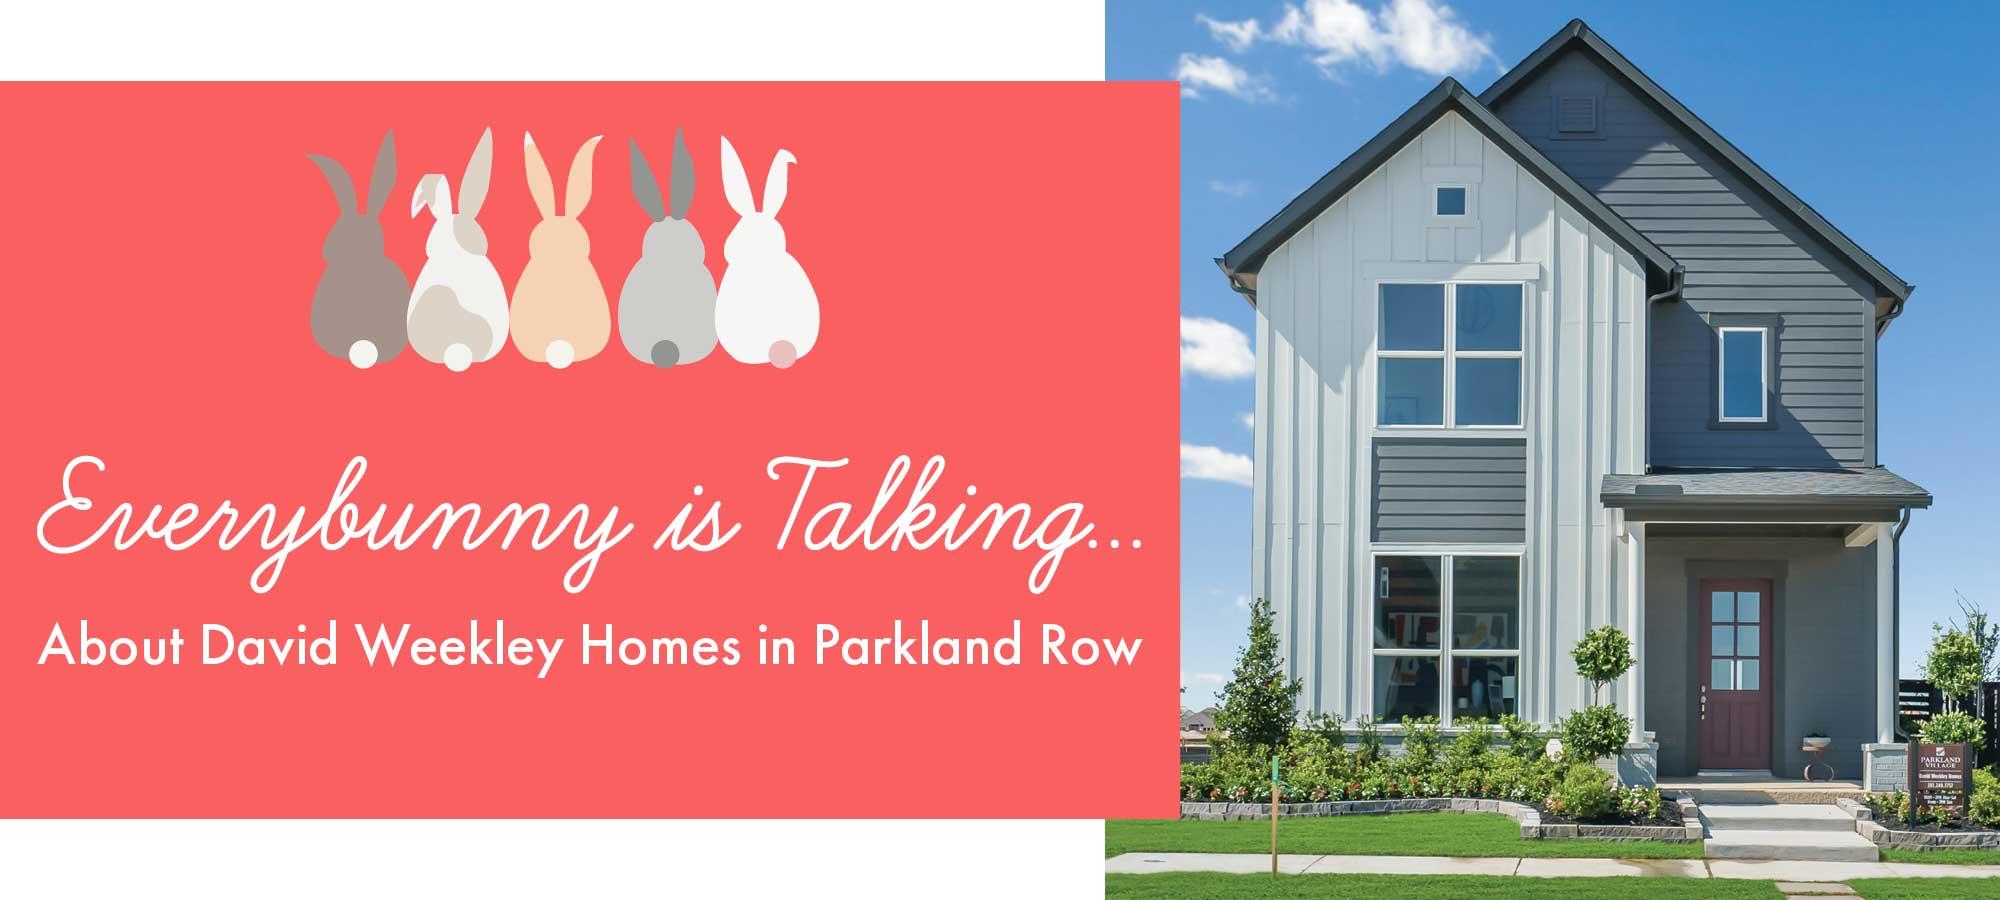 Every Bunny is Talking About David Weekley Homes in Parkland Row